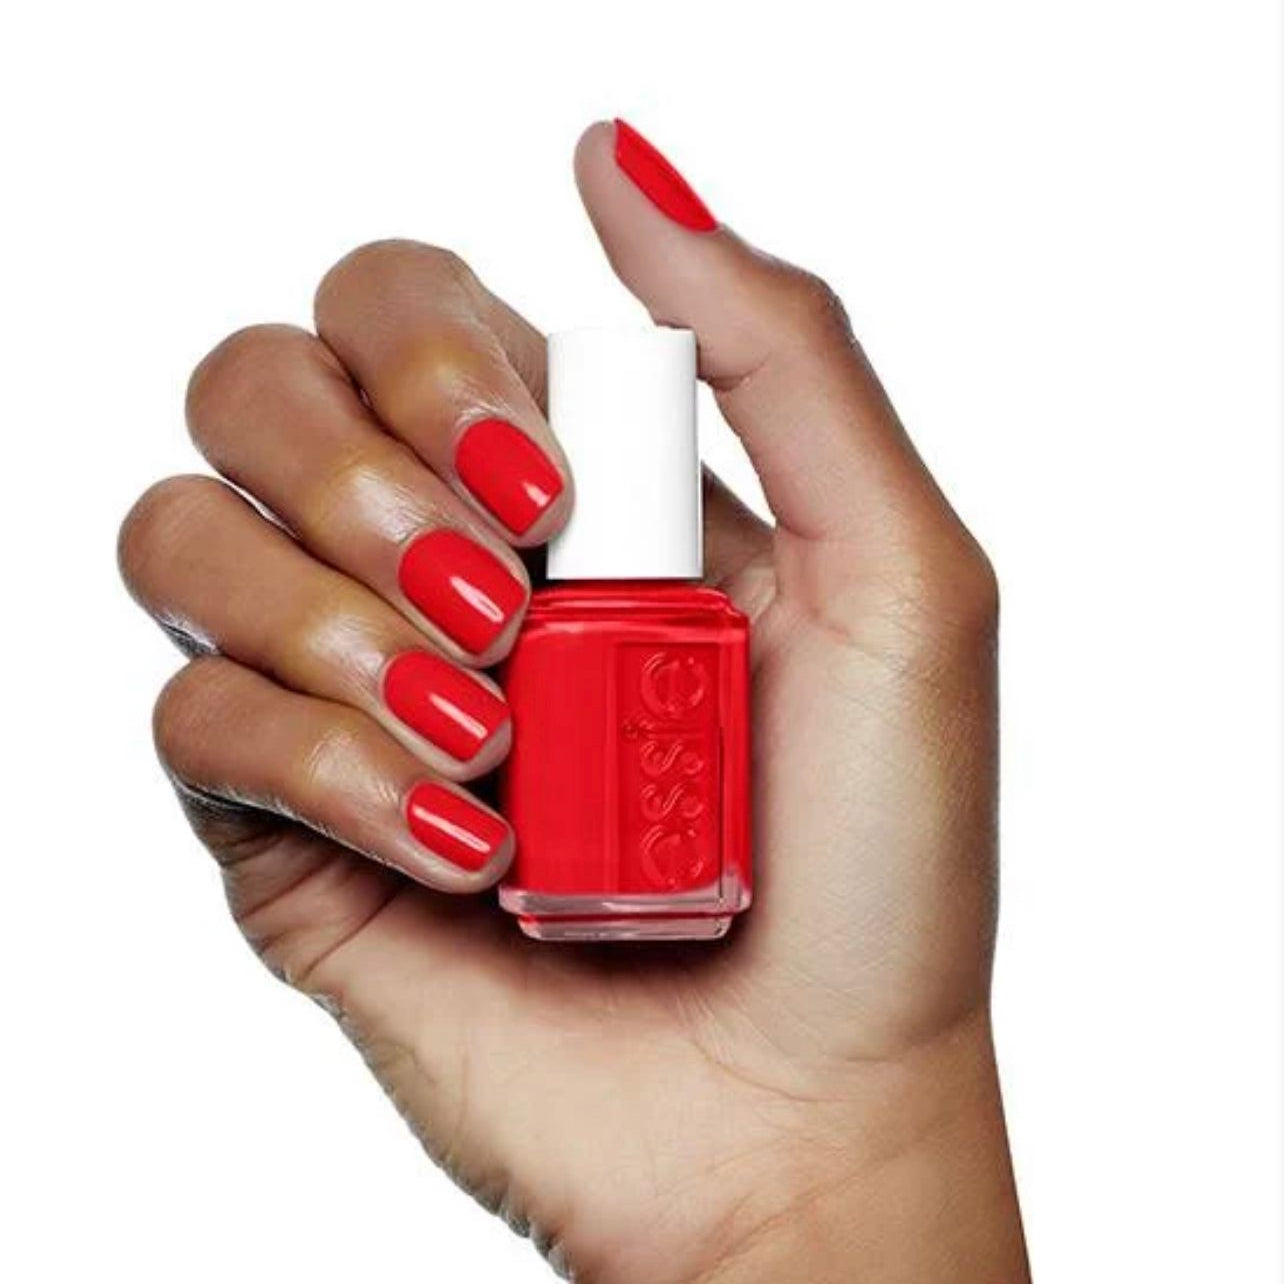 Essie Gel Couture Color 509 - Paint the Gown Red - IZZAT DAOUK Lebanon